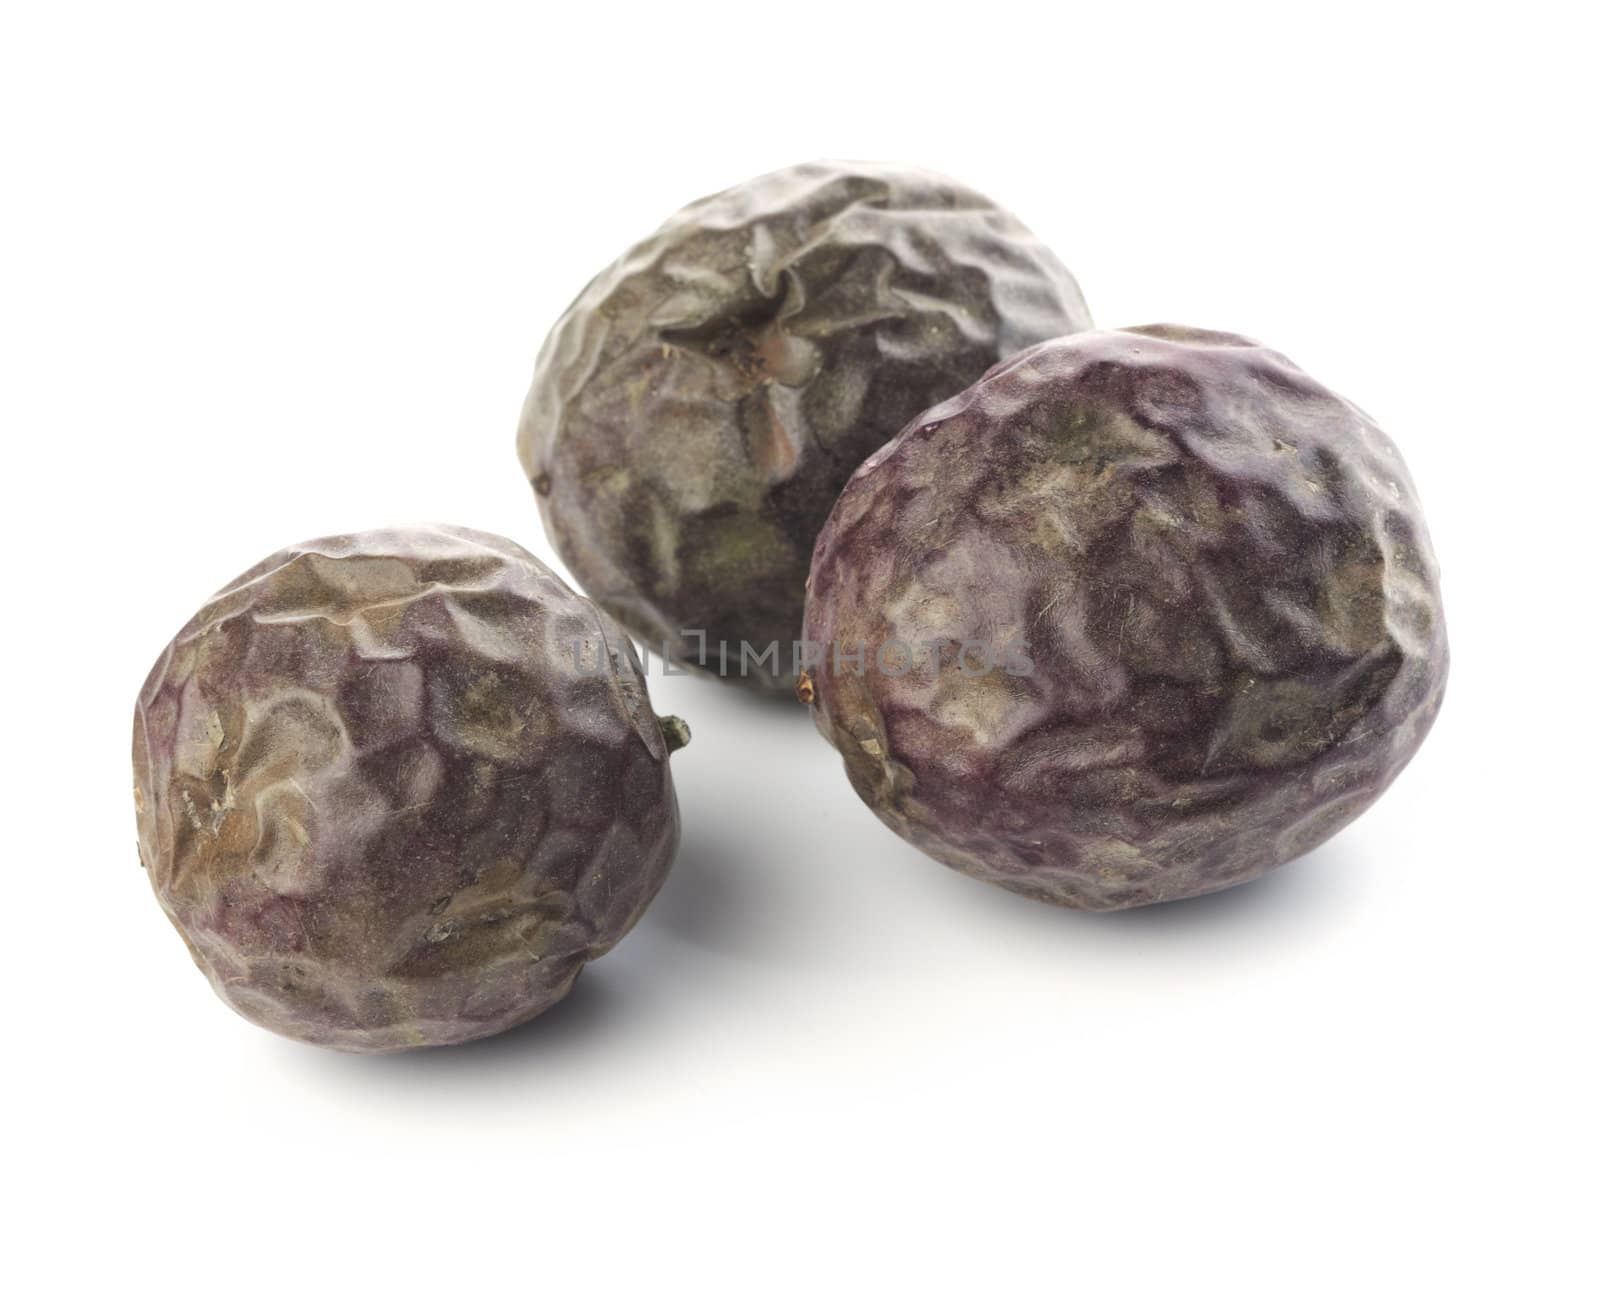 Three passion fruits isolated on white with natural shadows.